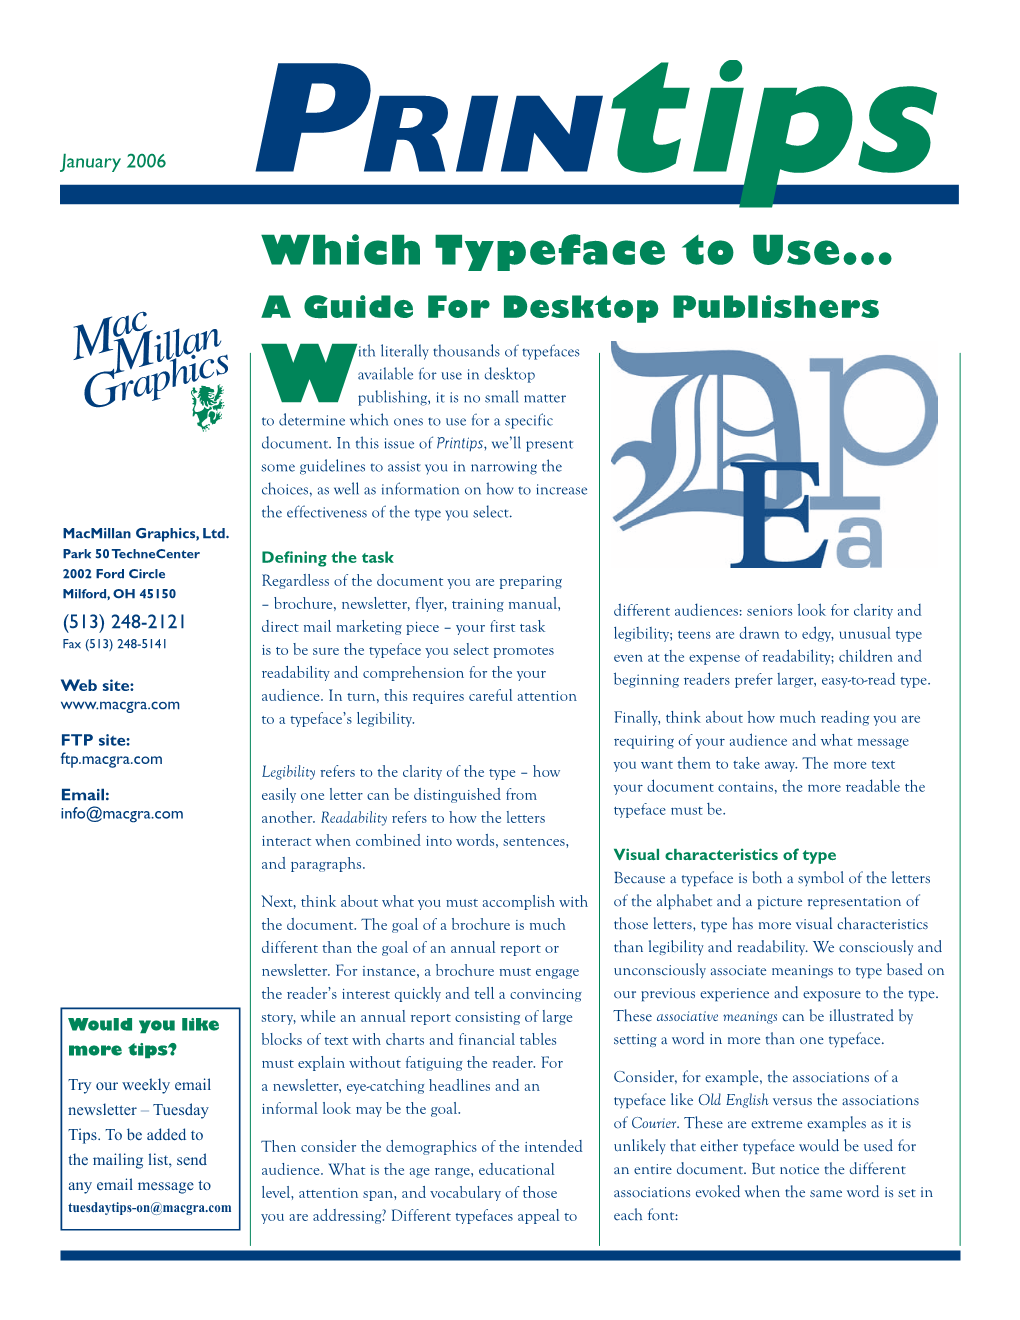 Which Typeface to Use...A Guide for Desktop Publishers